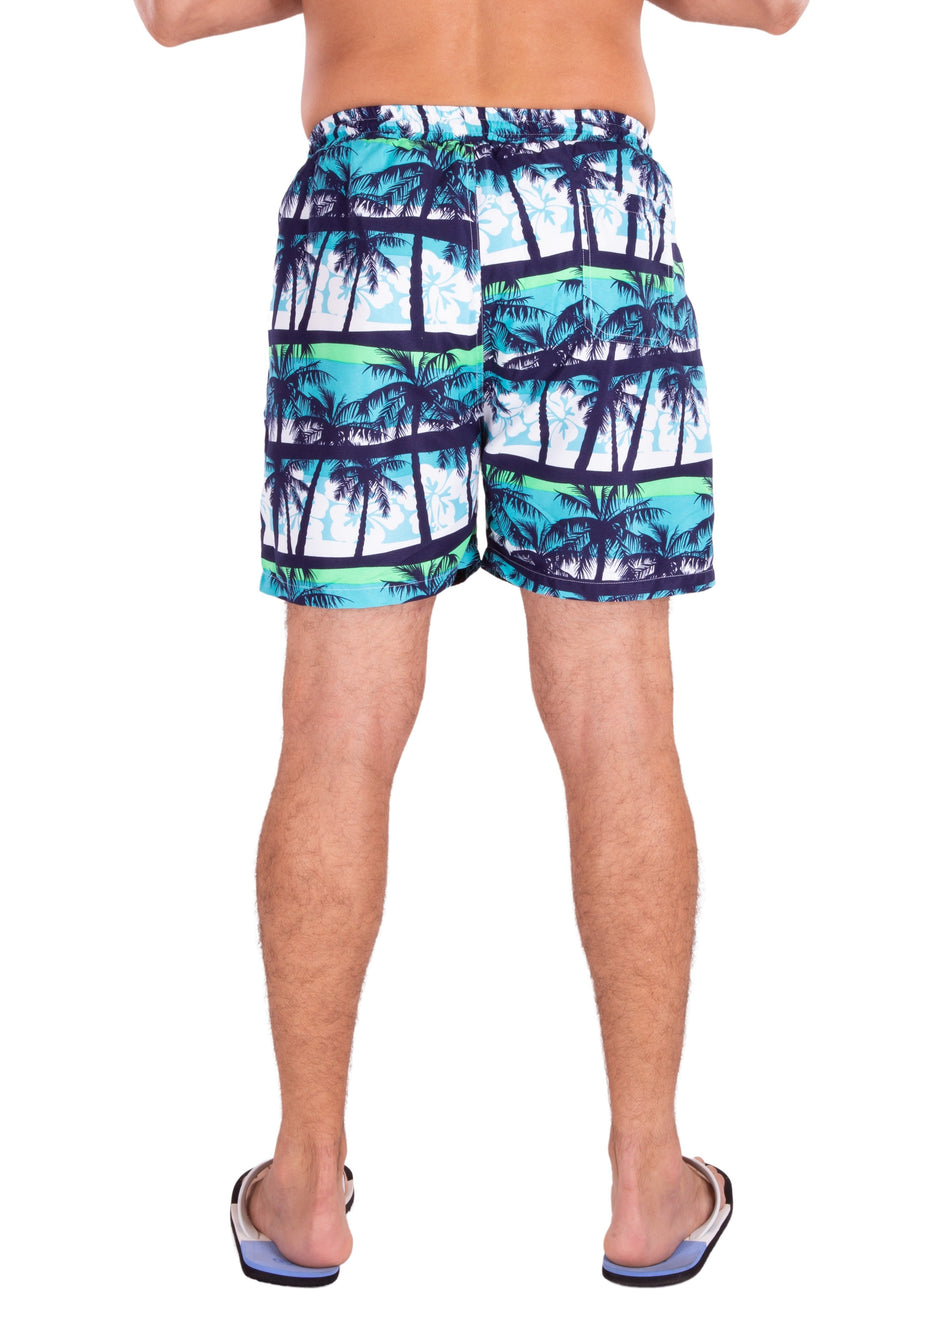 203153 - Turquoise Tropical Print Shorts